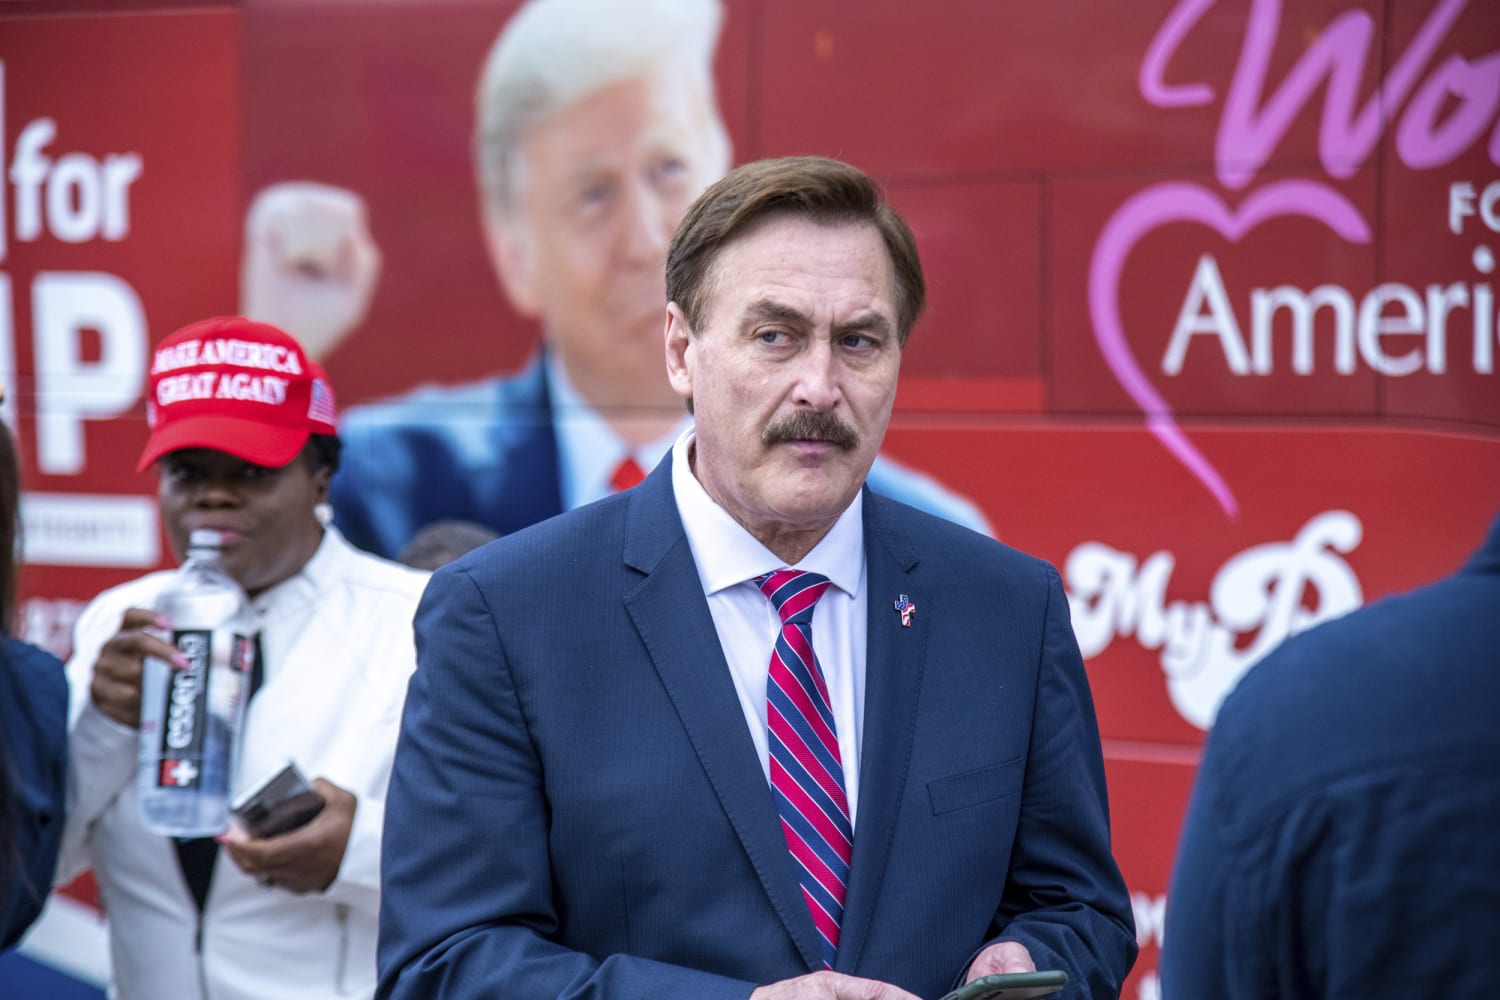 Trump ally Mike Lindell must face defamation suit over election-rigging claims